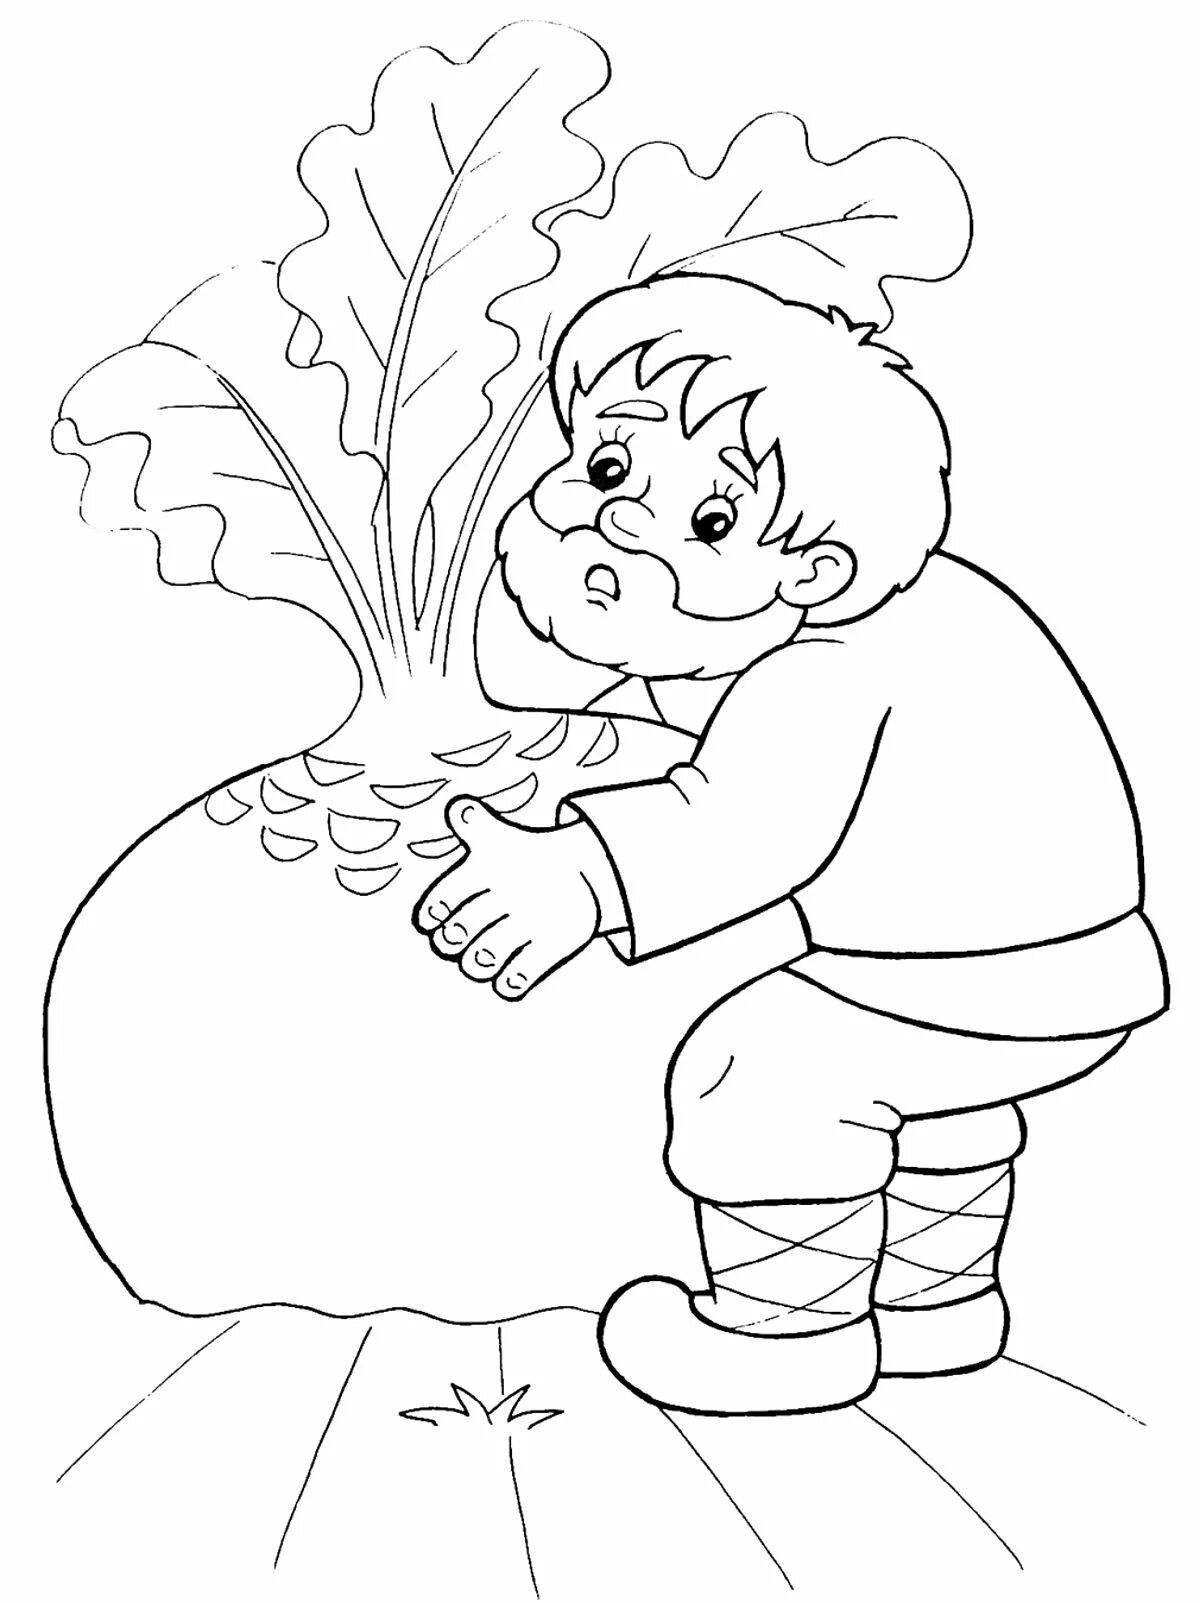 Fun coloring of turnips for children